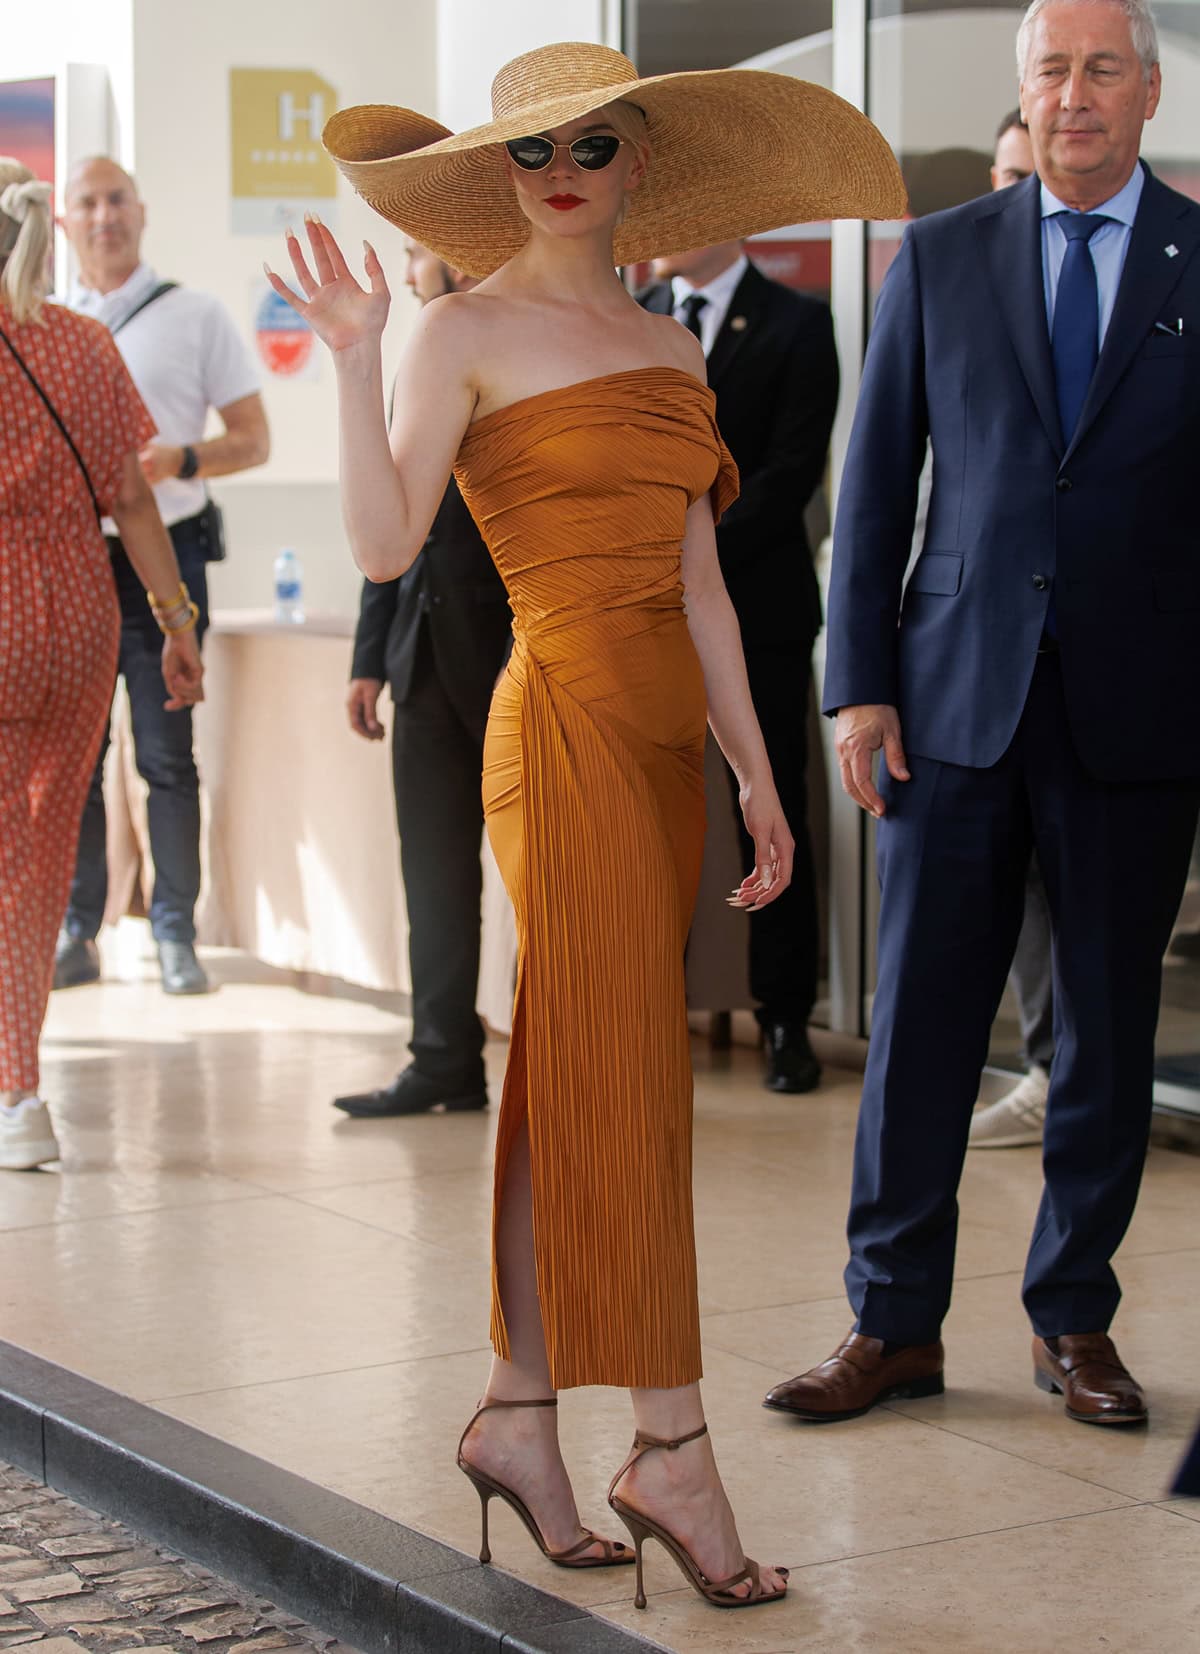 Anya Taylor-Joy made a chic arrival at Hotel Martinez in a vibrant orange Atlein midi-dress paired with Jimmy Choo sandals and an oversized Jacquemus straw hat